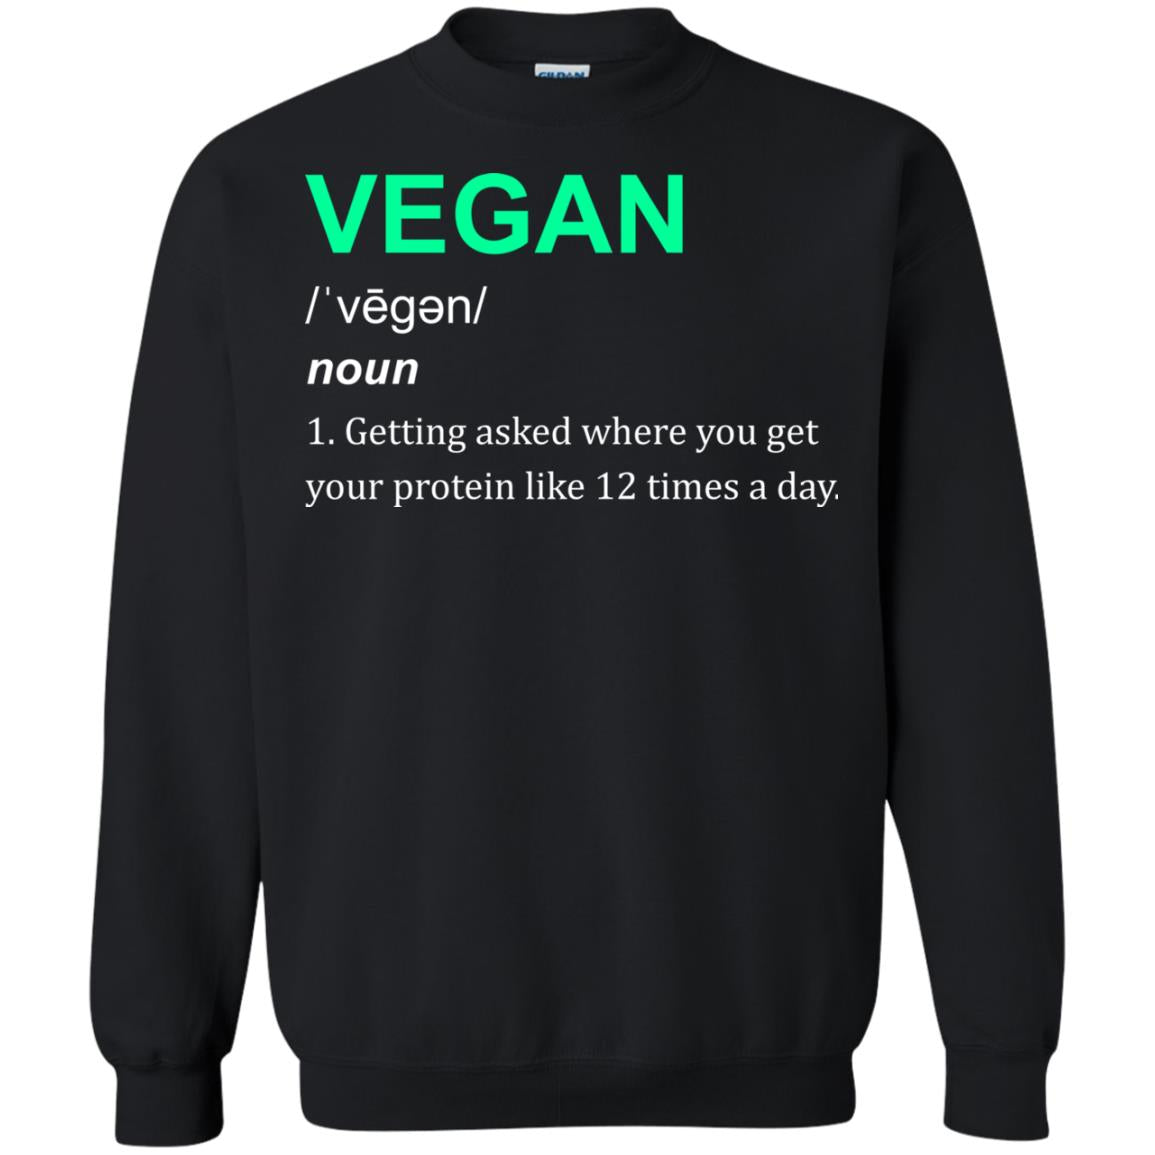 Vegan Shirt You Get Your Protein Like 12 Times A Day